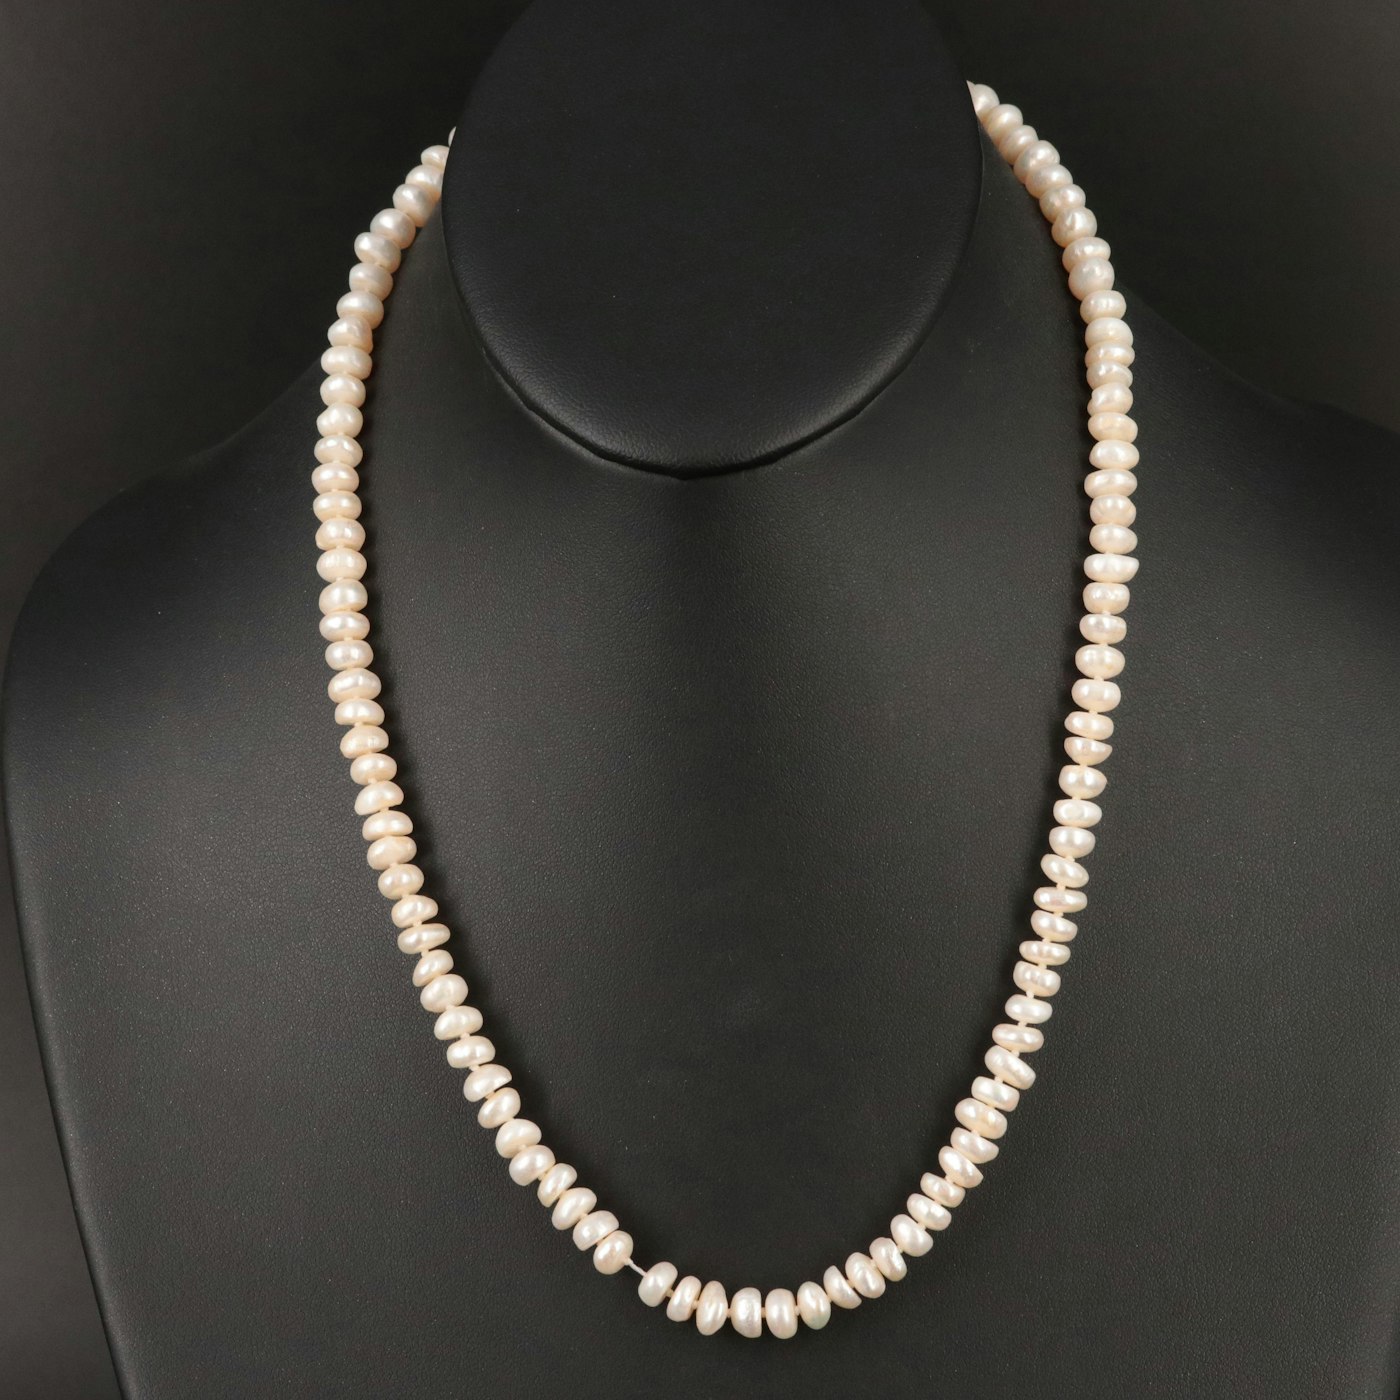 Pearl Necklace with 14K Clasp and Earrings | EBTH